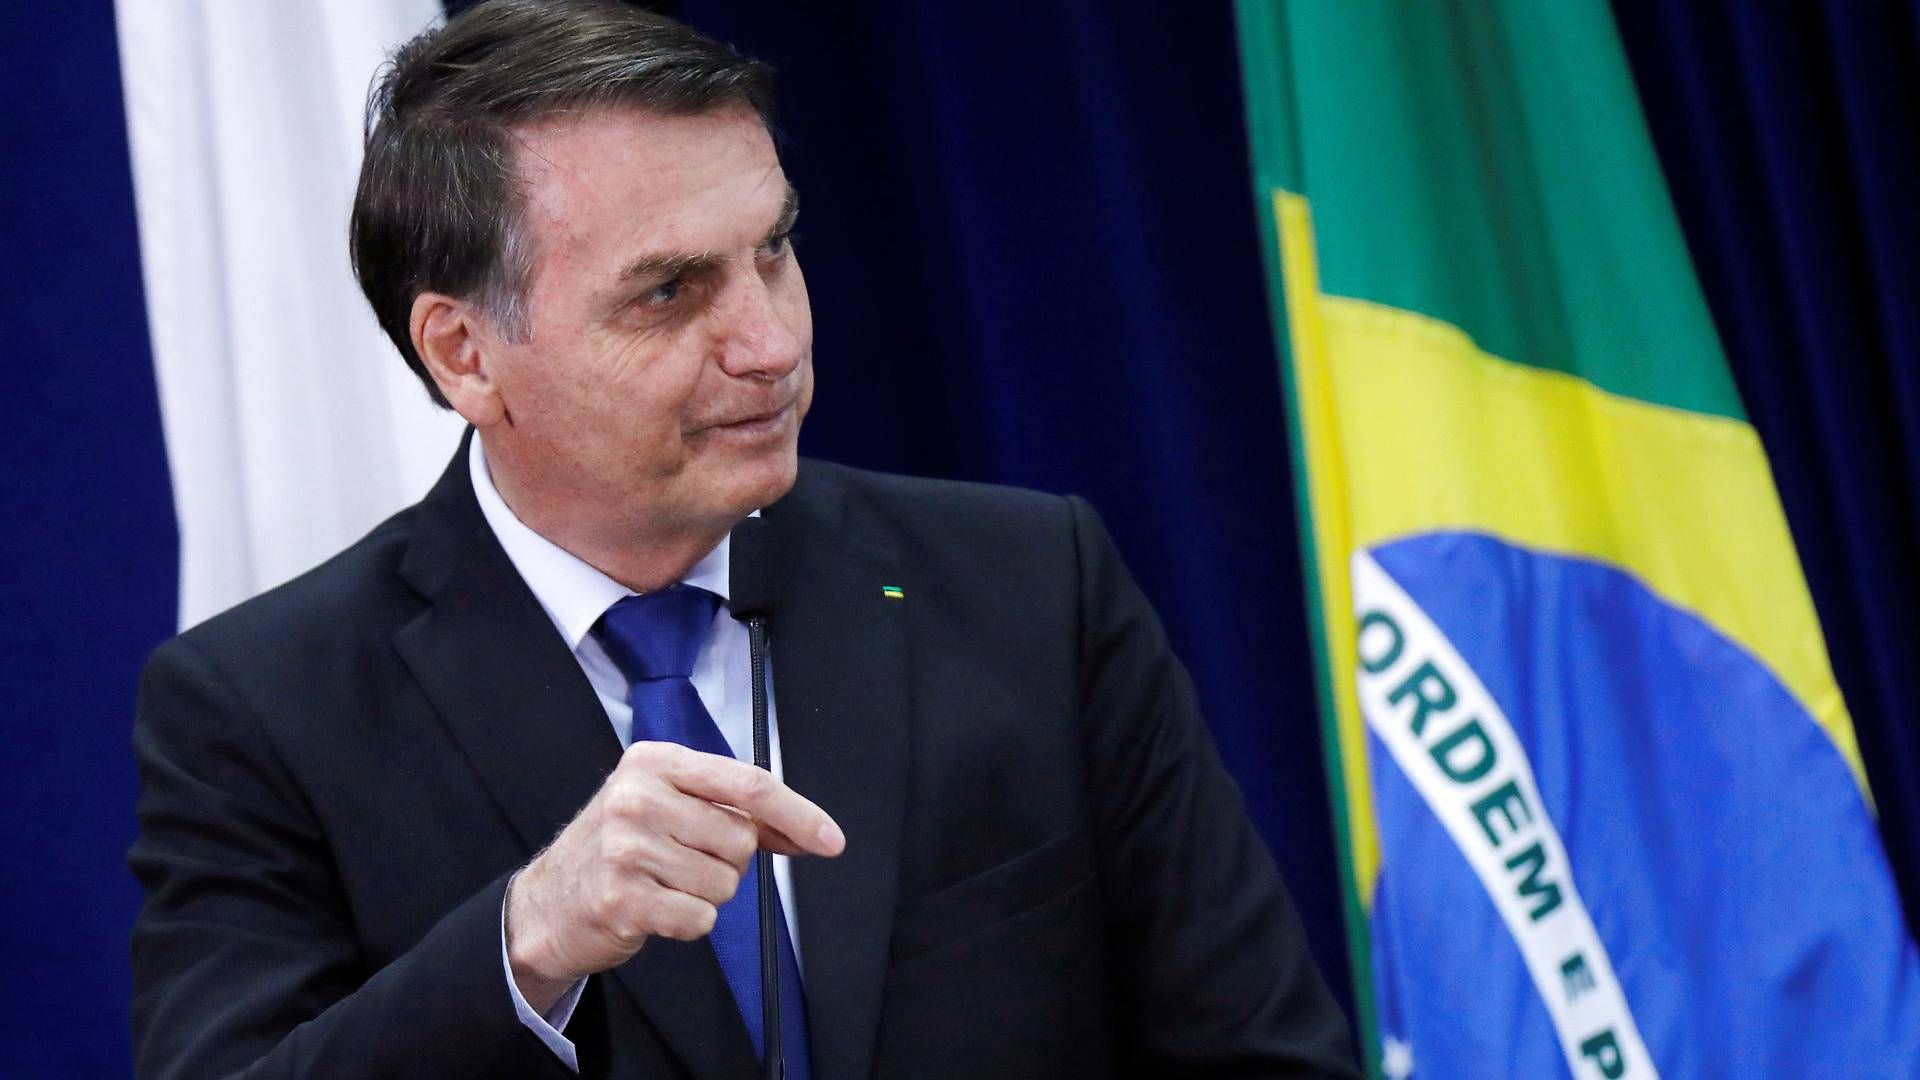 "Bolsonaro (Brazilian president) was considered one of the most market-friendly candidates, and his election boosted market optimism. So, when the markets woke up to the positive development, the local exchange reflected this in a very positive way," Seligson Asset Management Fund Manager Jonathan Aalto | Photo: Adriano Machado/Reuters/Ritzau Scanpix/REUTERS / X02151